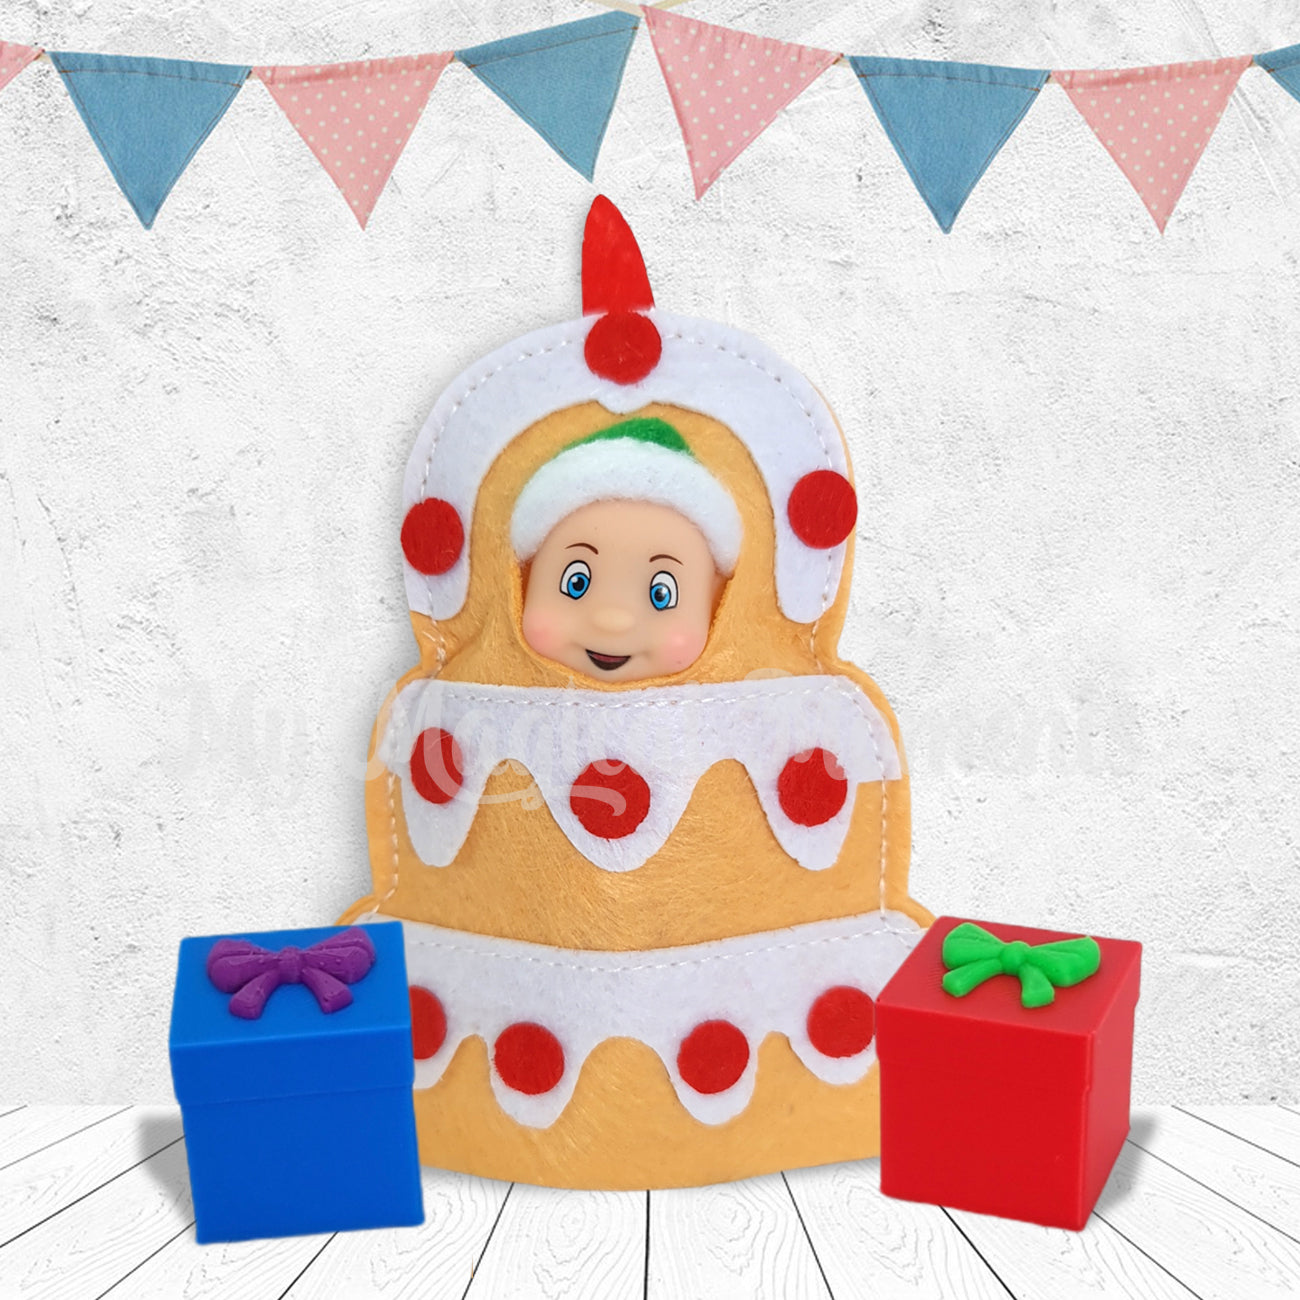 Elf baby dressed as a cake costume with presents